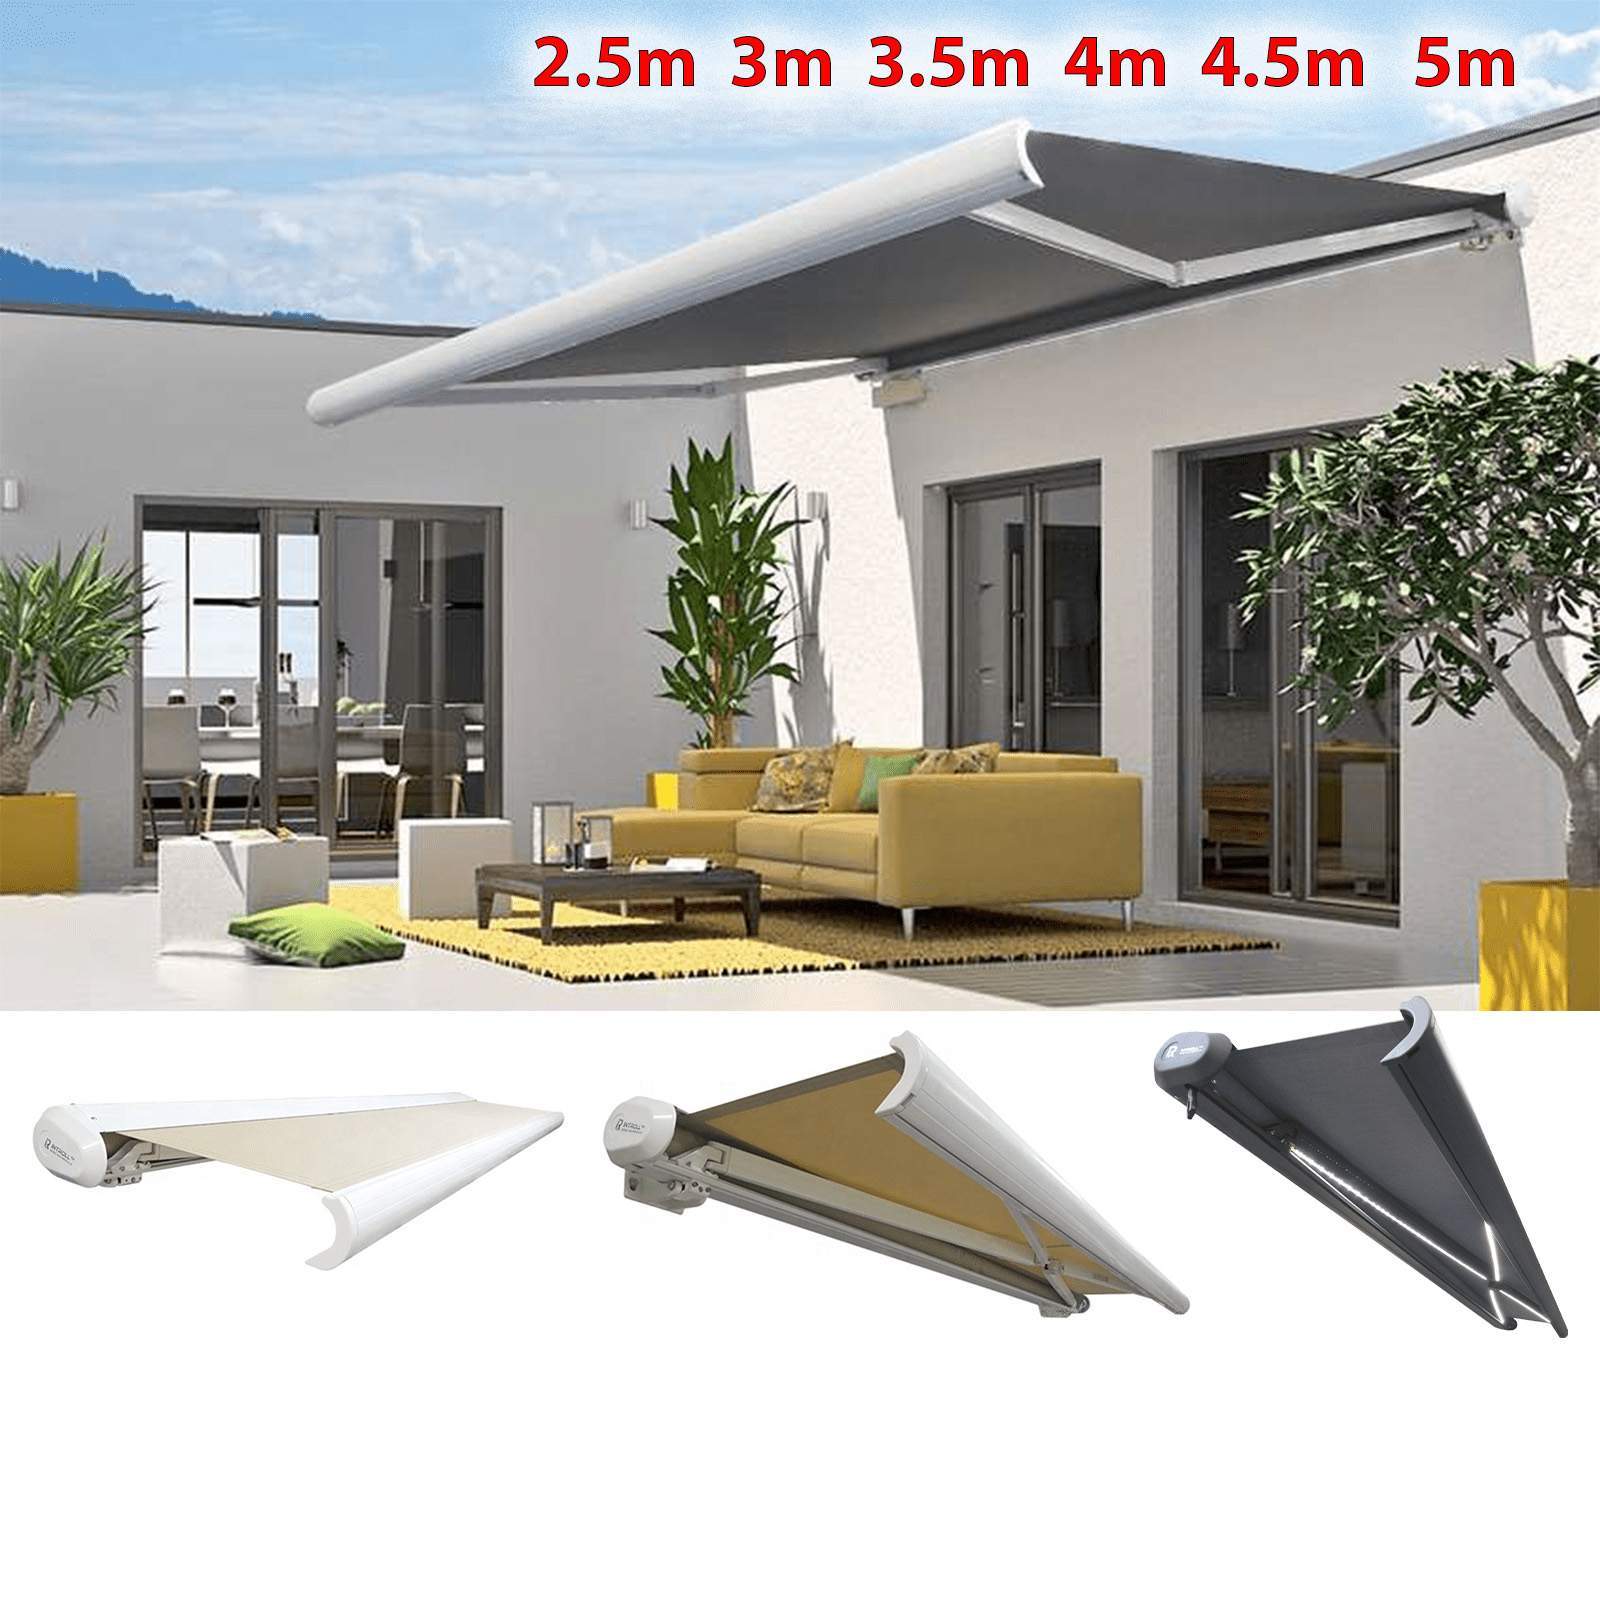 INT500 Full Cassette - Retractable Garden Patio Awnings Canopy Shop Front  Commercial or residential - Electric Motorized Remote controlled or Manual